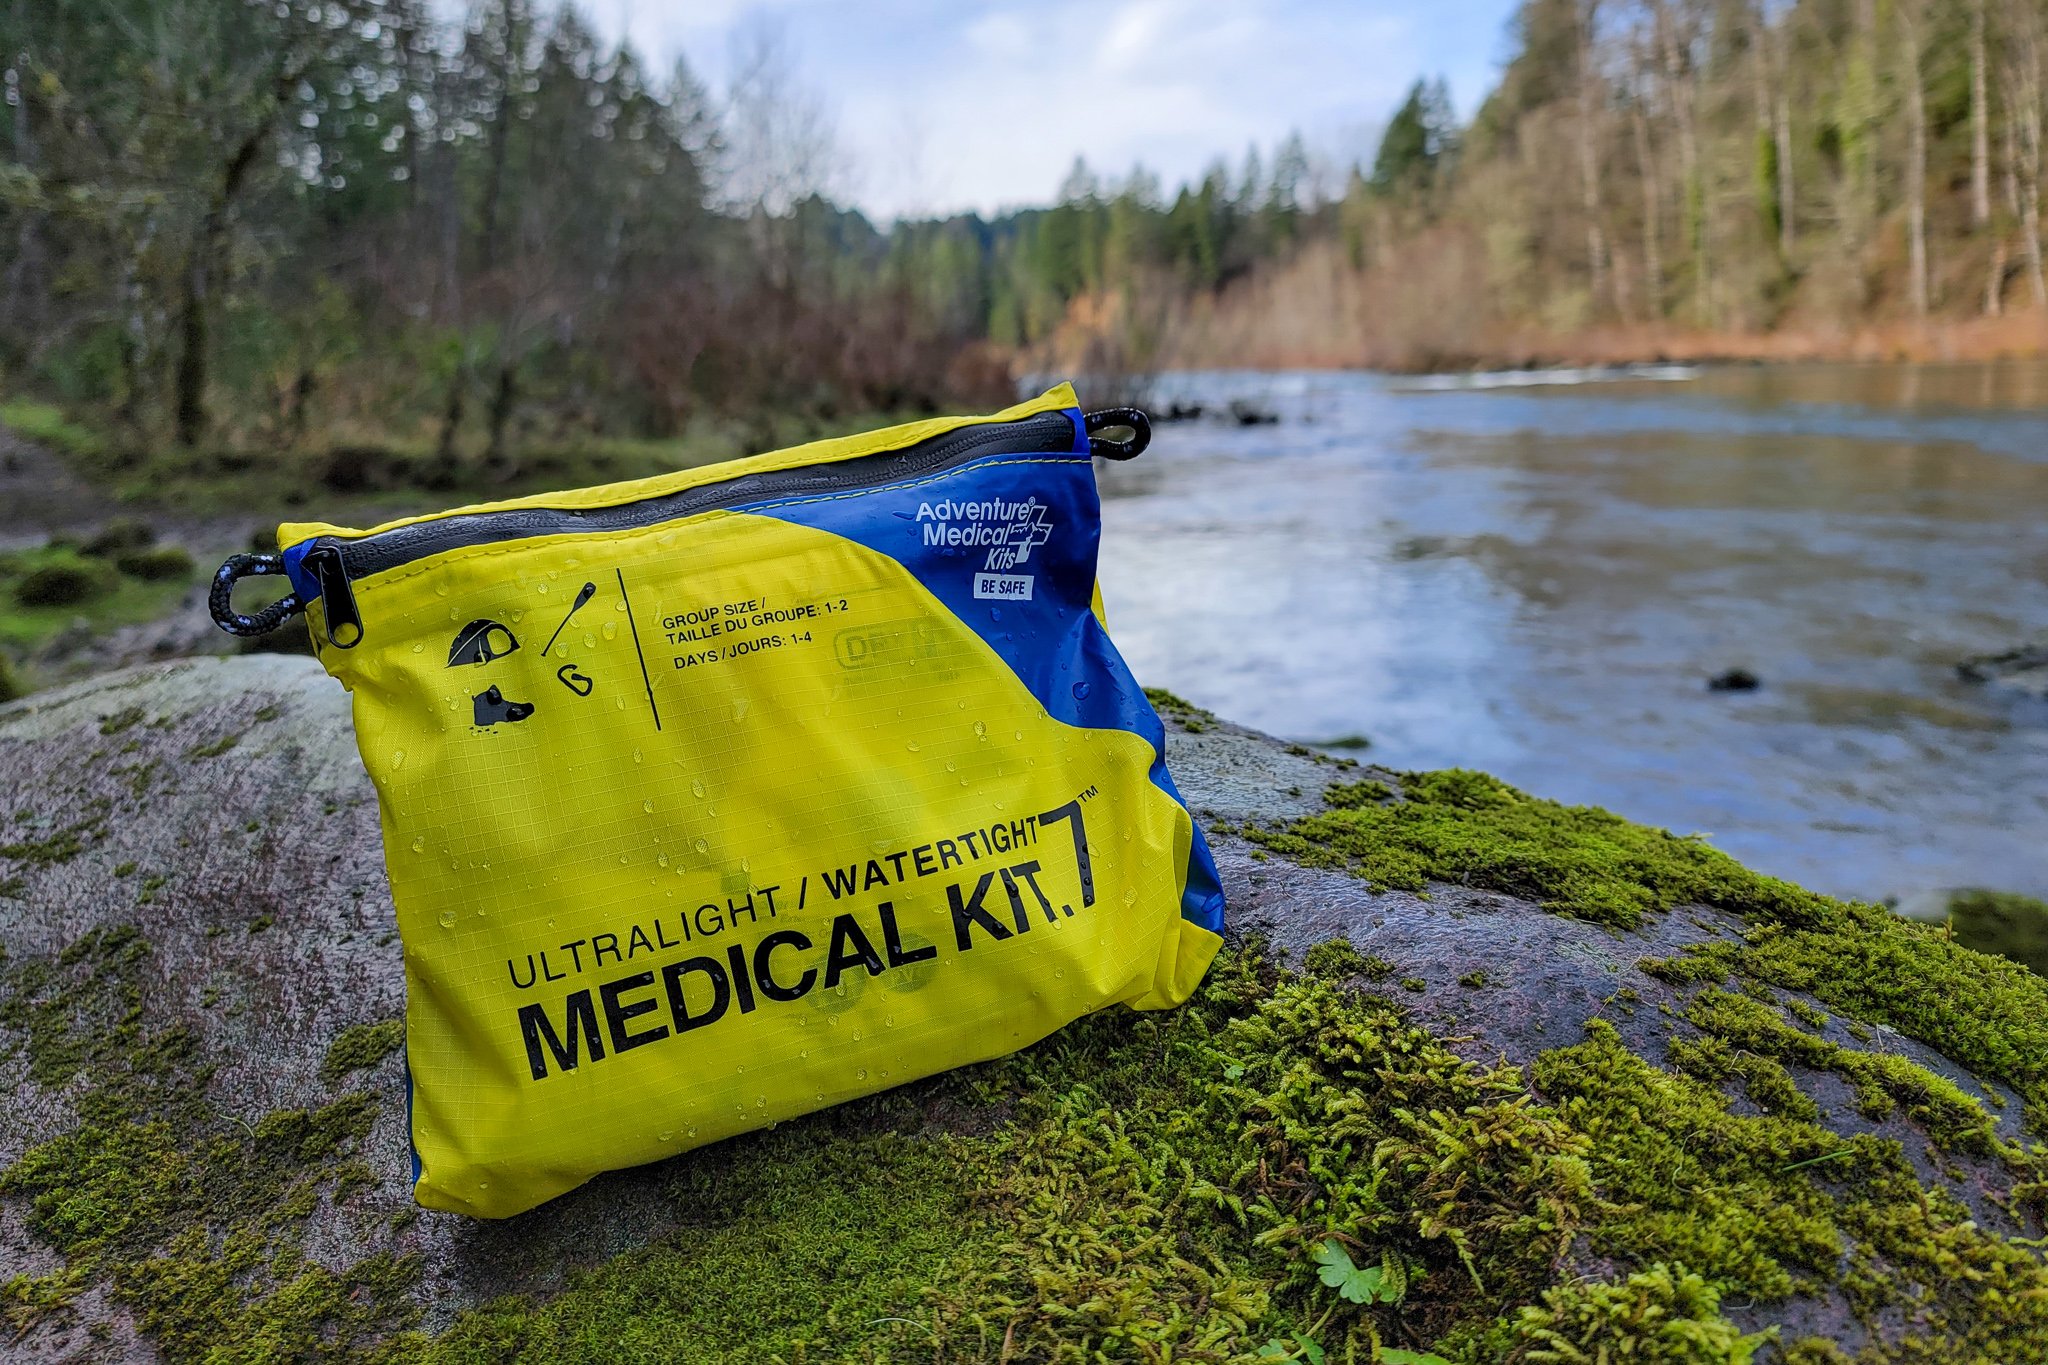 Closeup of the AMK Ultralight/Watertight .7 First Aid Kit in front of a Pacific Northwest River